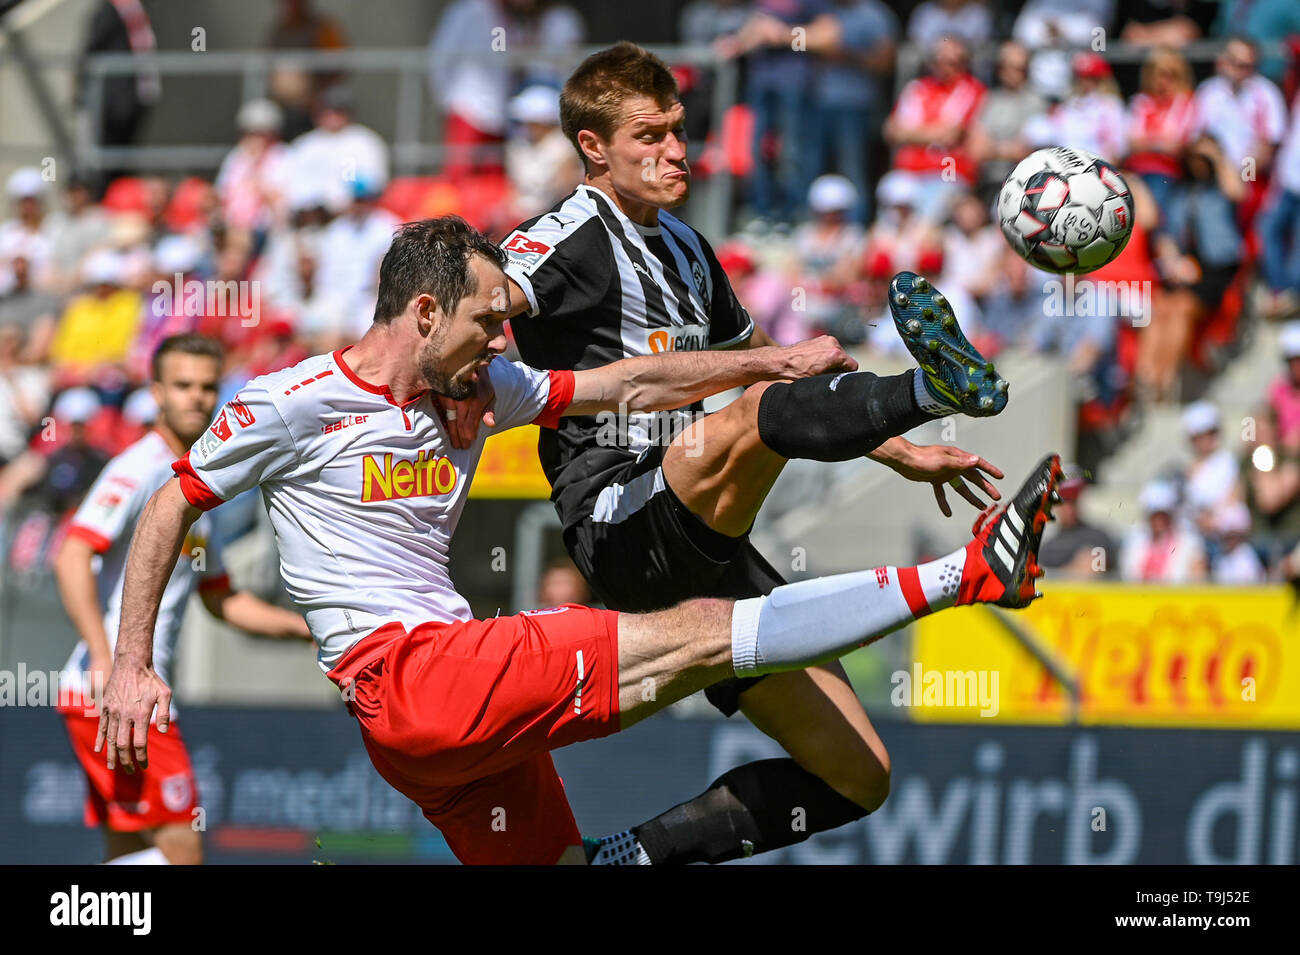 Regensburg, Germany. 19th May, 2019. Soccer: 2nd Bundesliga, Jahn Regensburg - SV Sandhausen, 34th matchday in the Continental Arena. Sebastian Nachreiner from Regensburg (l) and Kevin Behrens from Sandhausen fight for the ball. Credit: Armin Weigel/dpa - IMPORTANT NOTE: In accordance with the requirements of the DFL Deutsche Fußball Liga or the DFB Deutscher Fußball-Bund, it is prohibited to use or have used photographs taken in the stadium and/or the match in the form of sequence images and/or video-like photo sequences./dpa/Alamy Live News Stock Photo